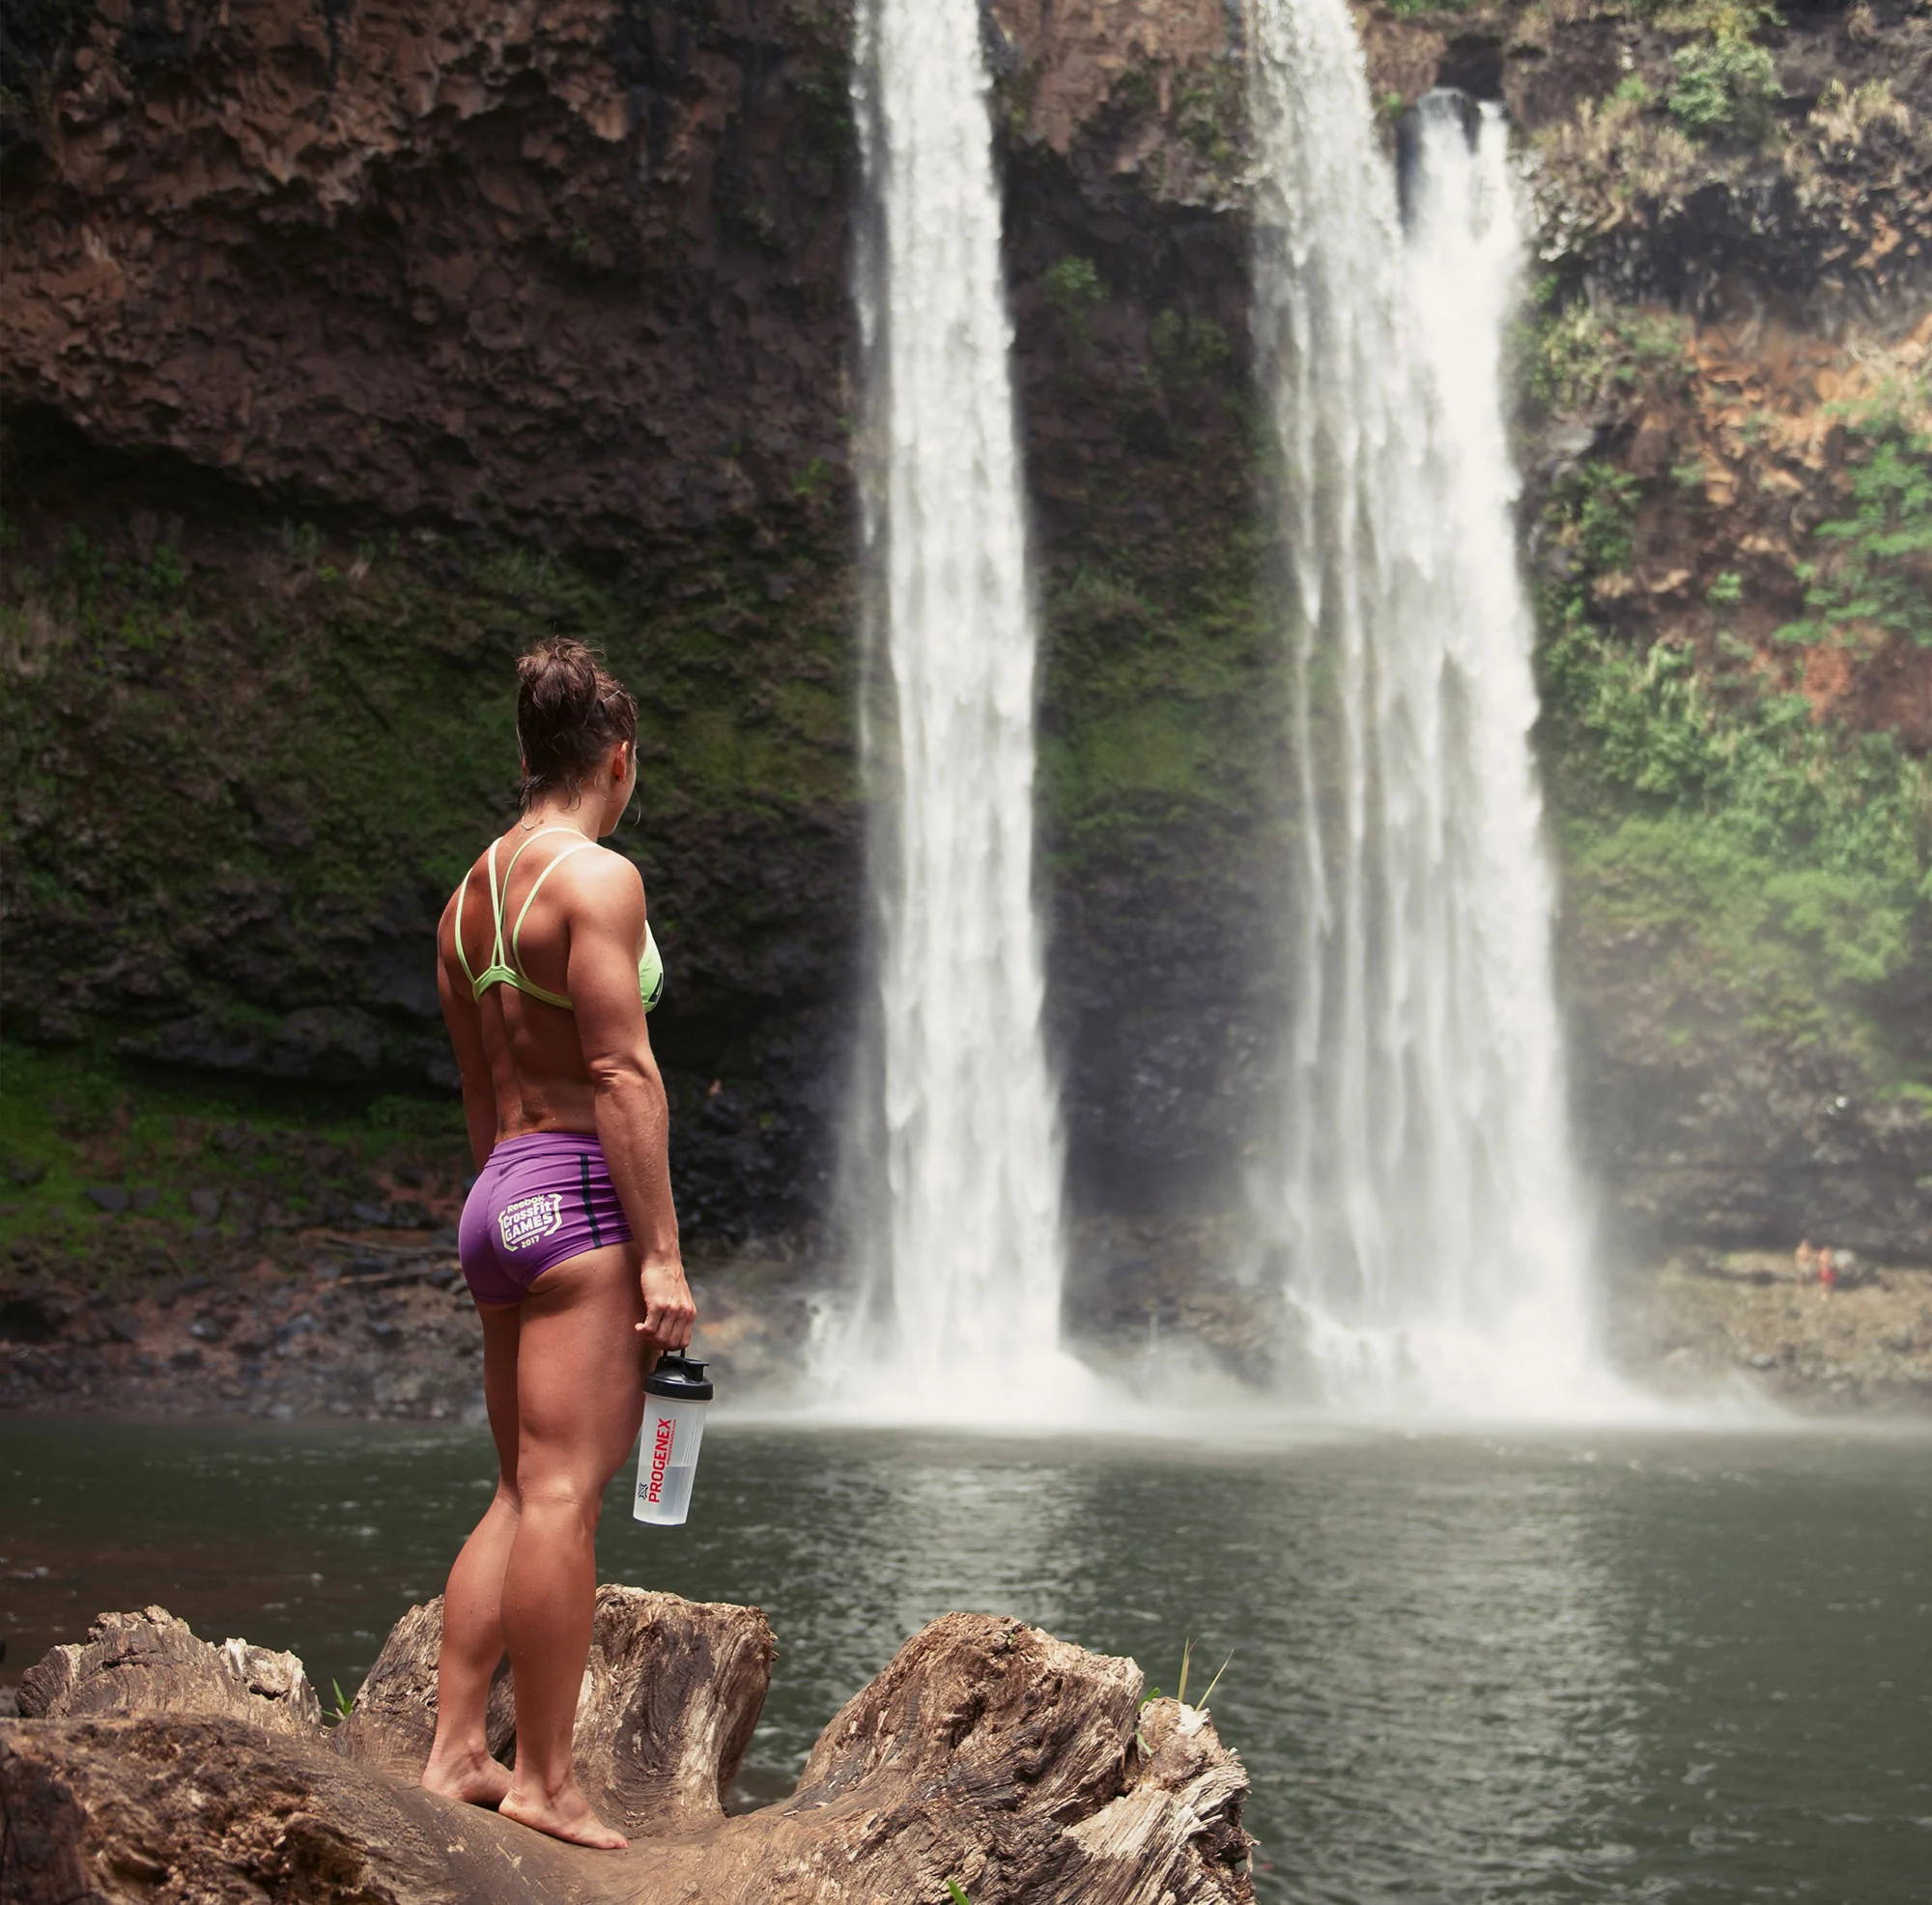 Woman standing in front of falling waterfall with PROGENEX shaker in hand